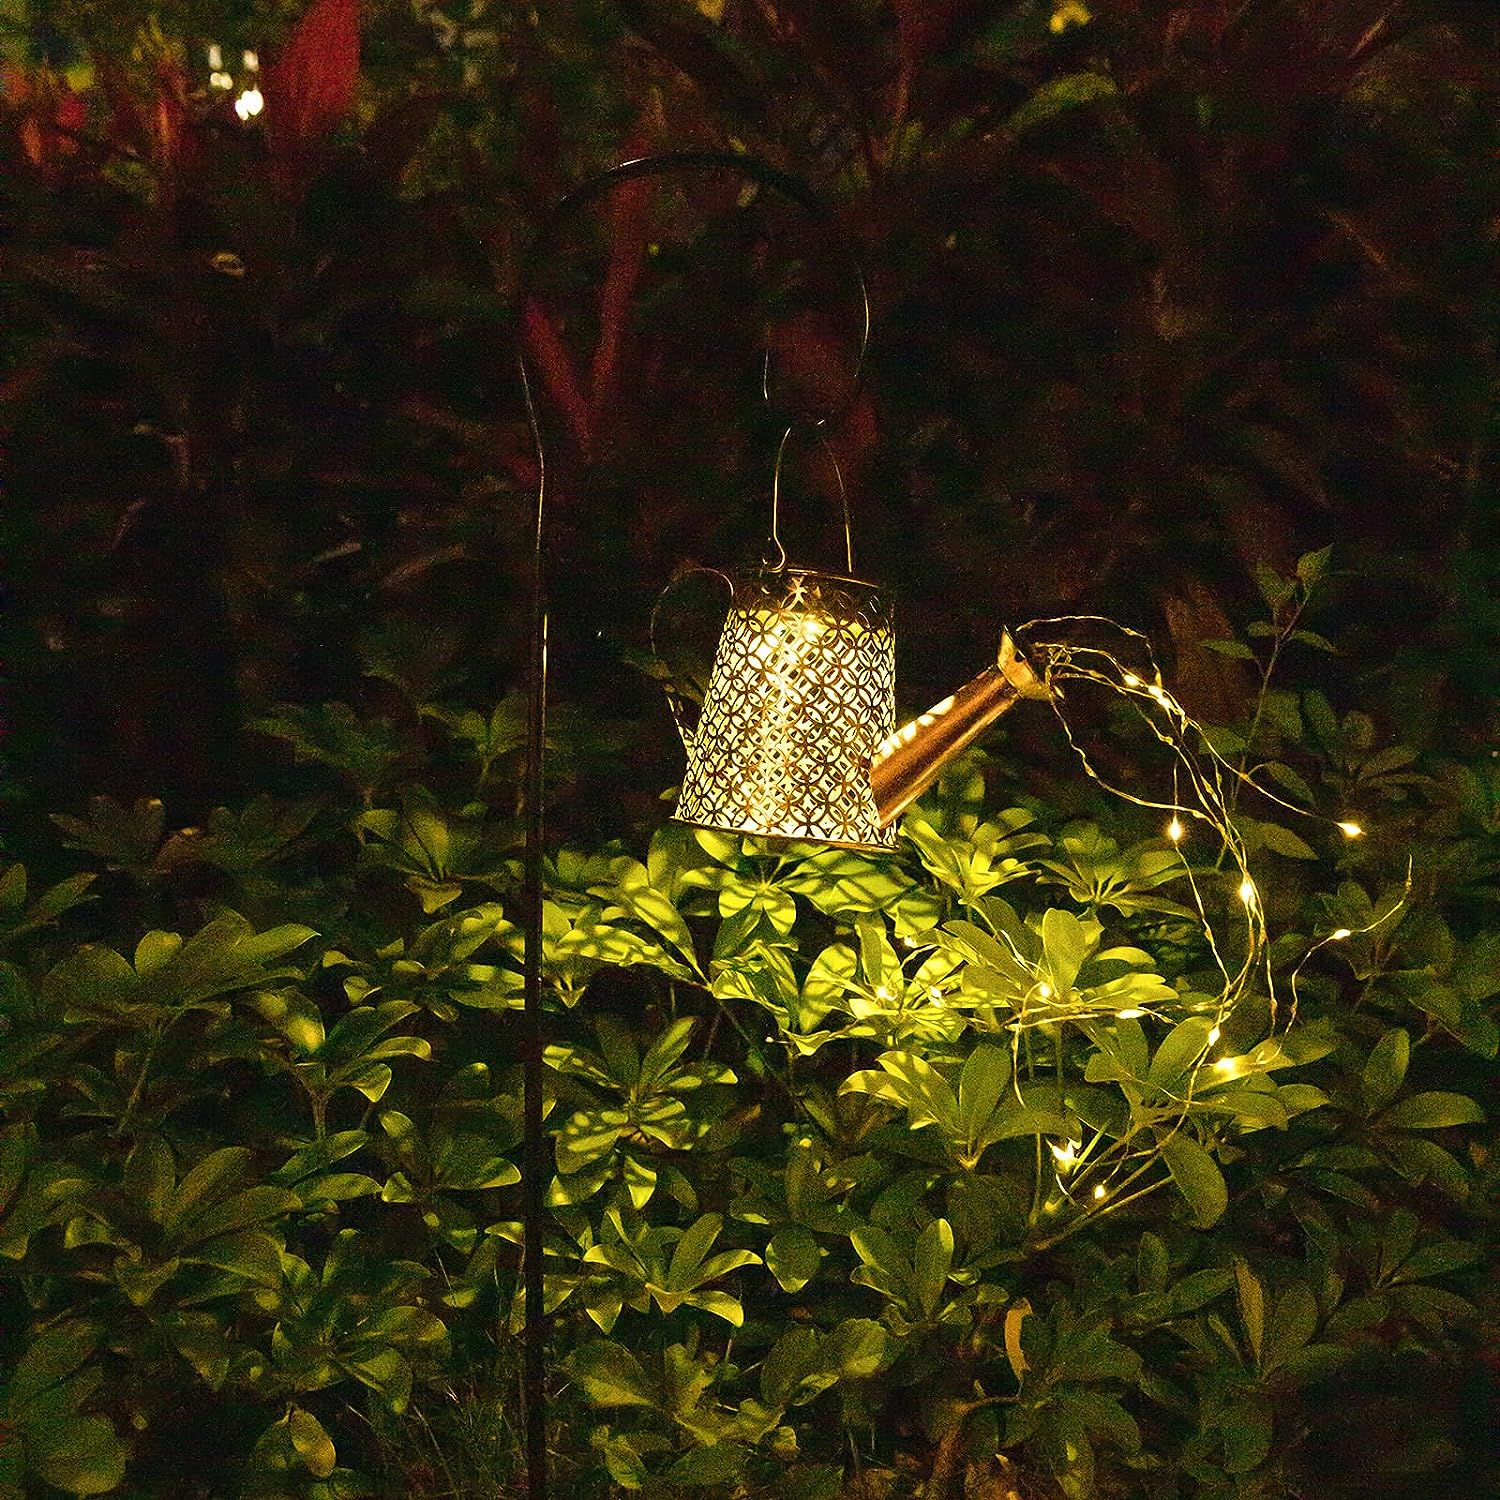 night shot of hook light shaped like a watering can with string lights coming out of spout